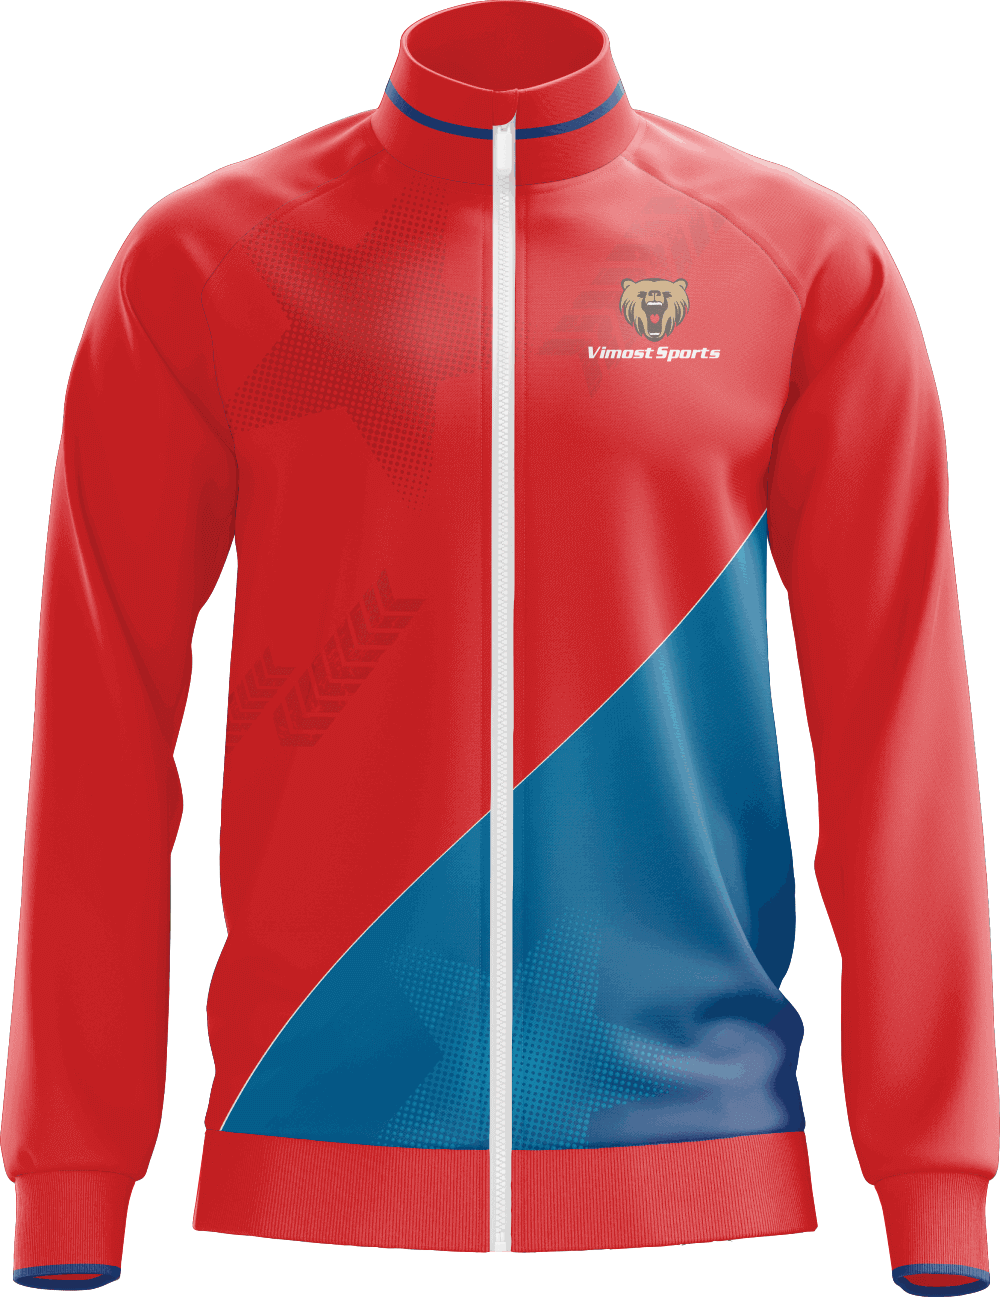  New Fashionable Sublimated Red And Blue Jacket for Wholesale